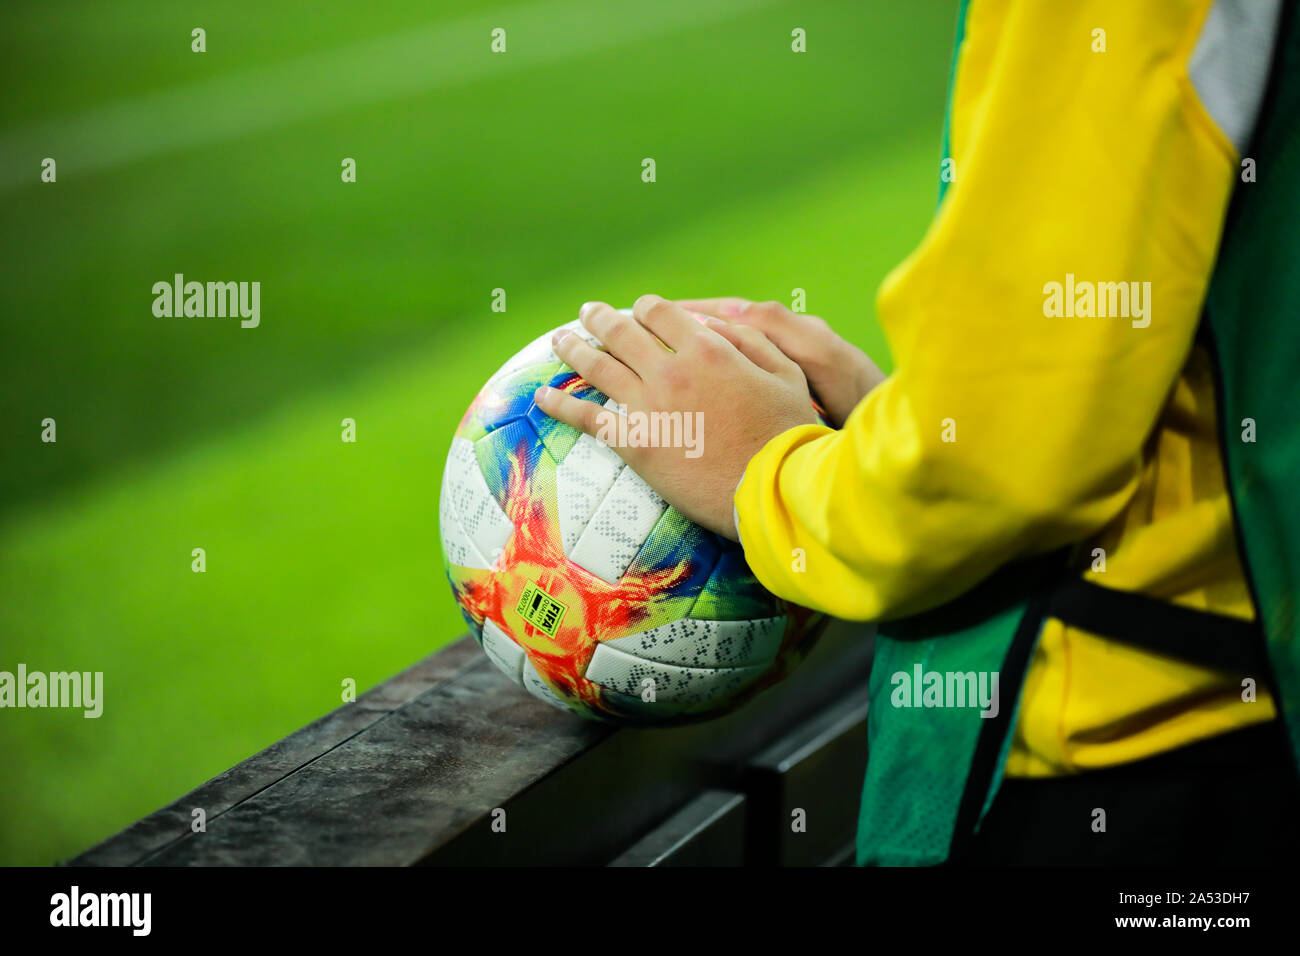 Bucharest, Romania - October 15, 2019: Details with the hands of a boy on an Adidas Conext 19 European qualifiers official soccer match ball on Arena Stock Photo